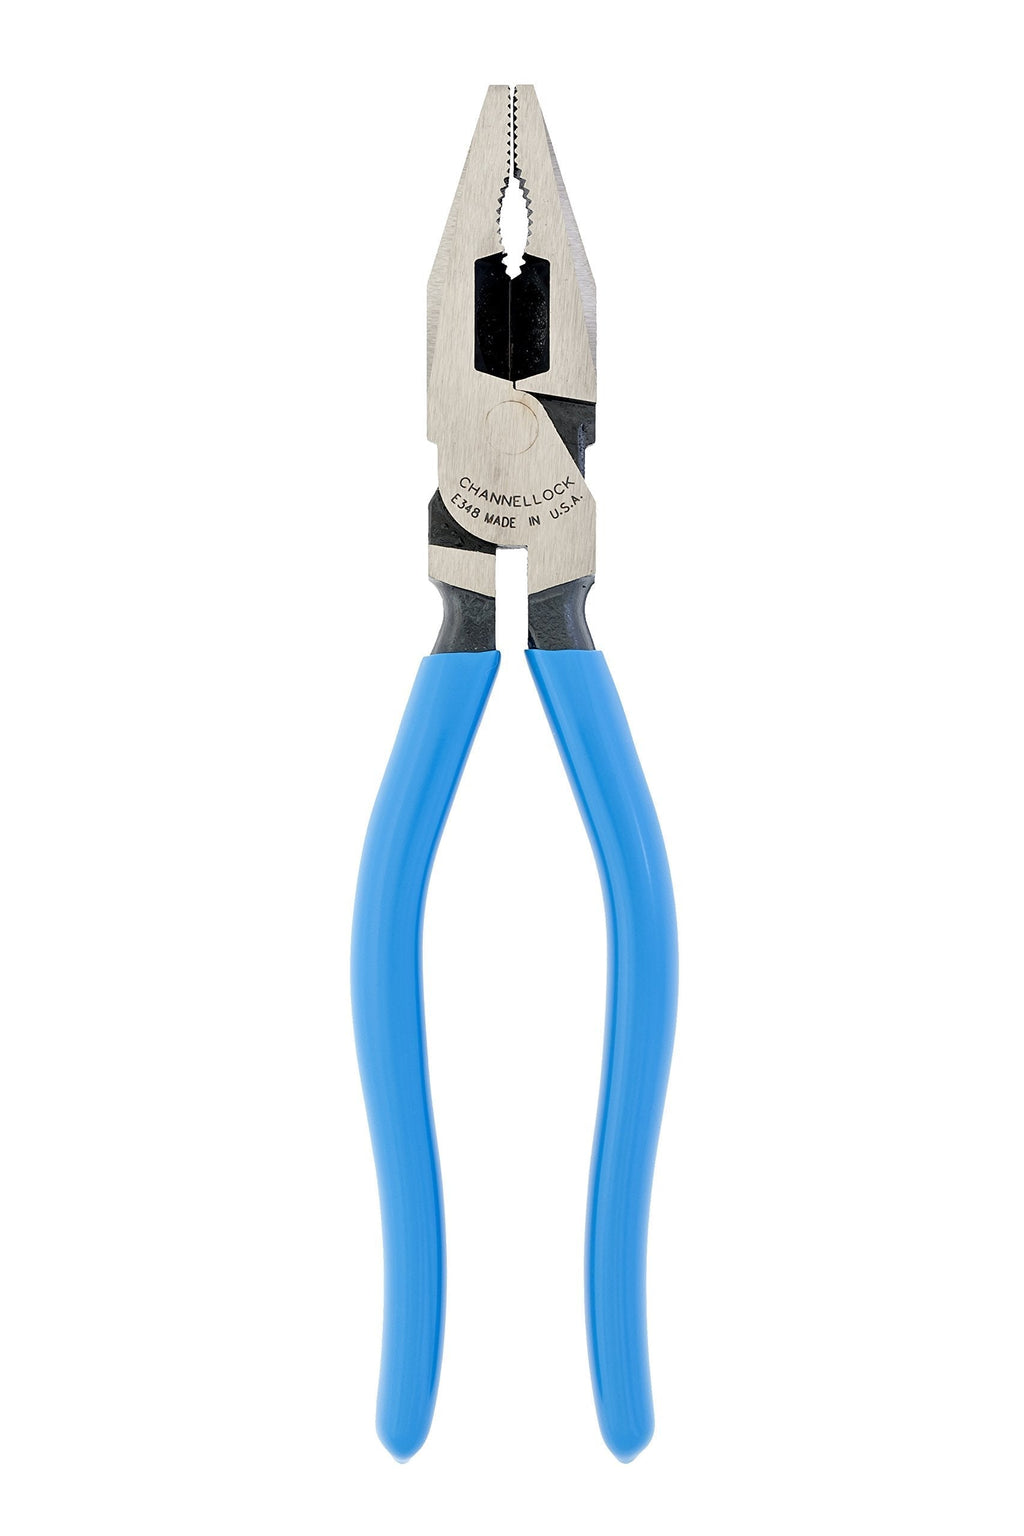 Channellock E348 E Series 8-Inch Combination Plier with XLT Joint